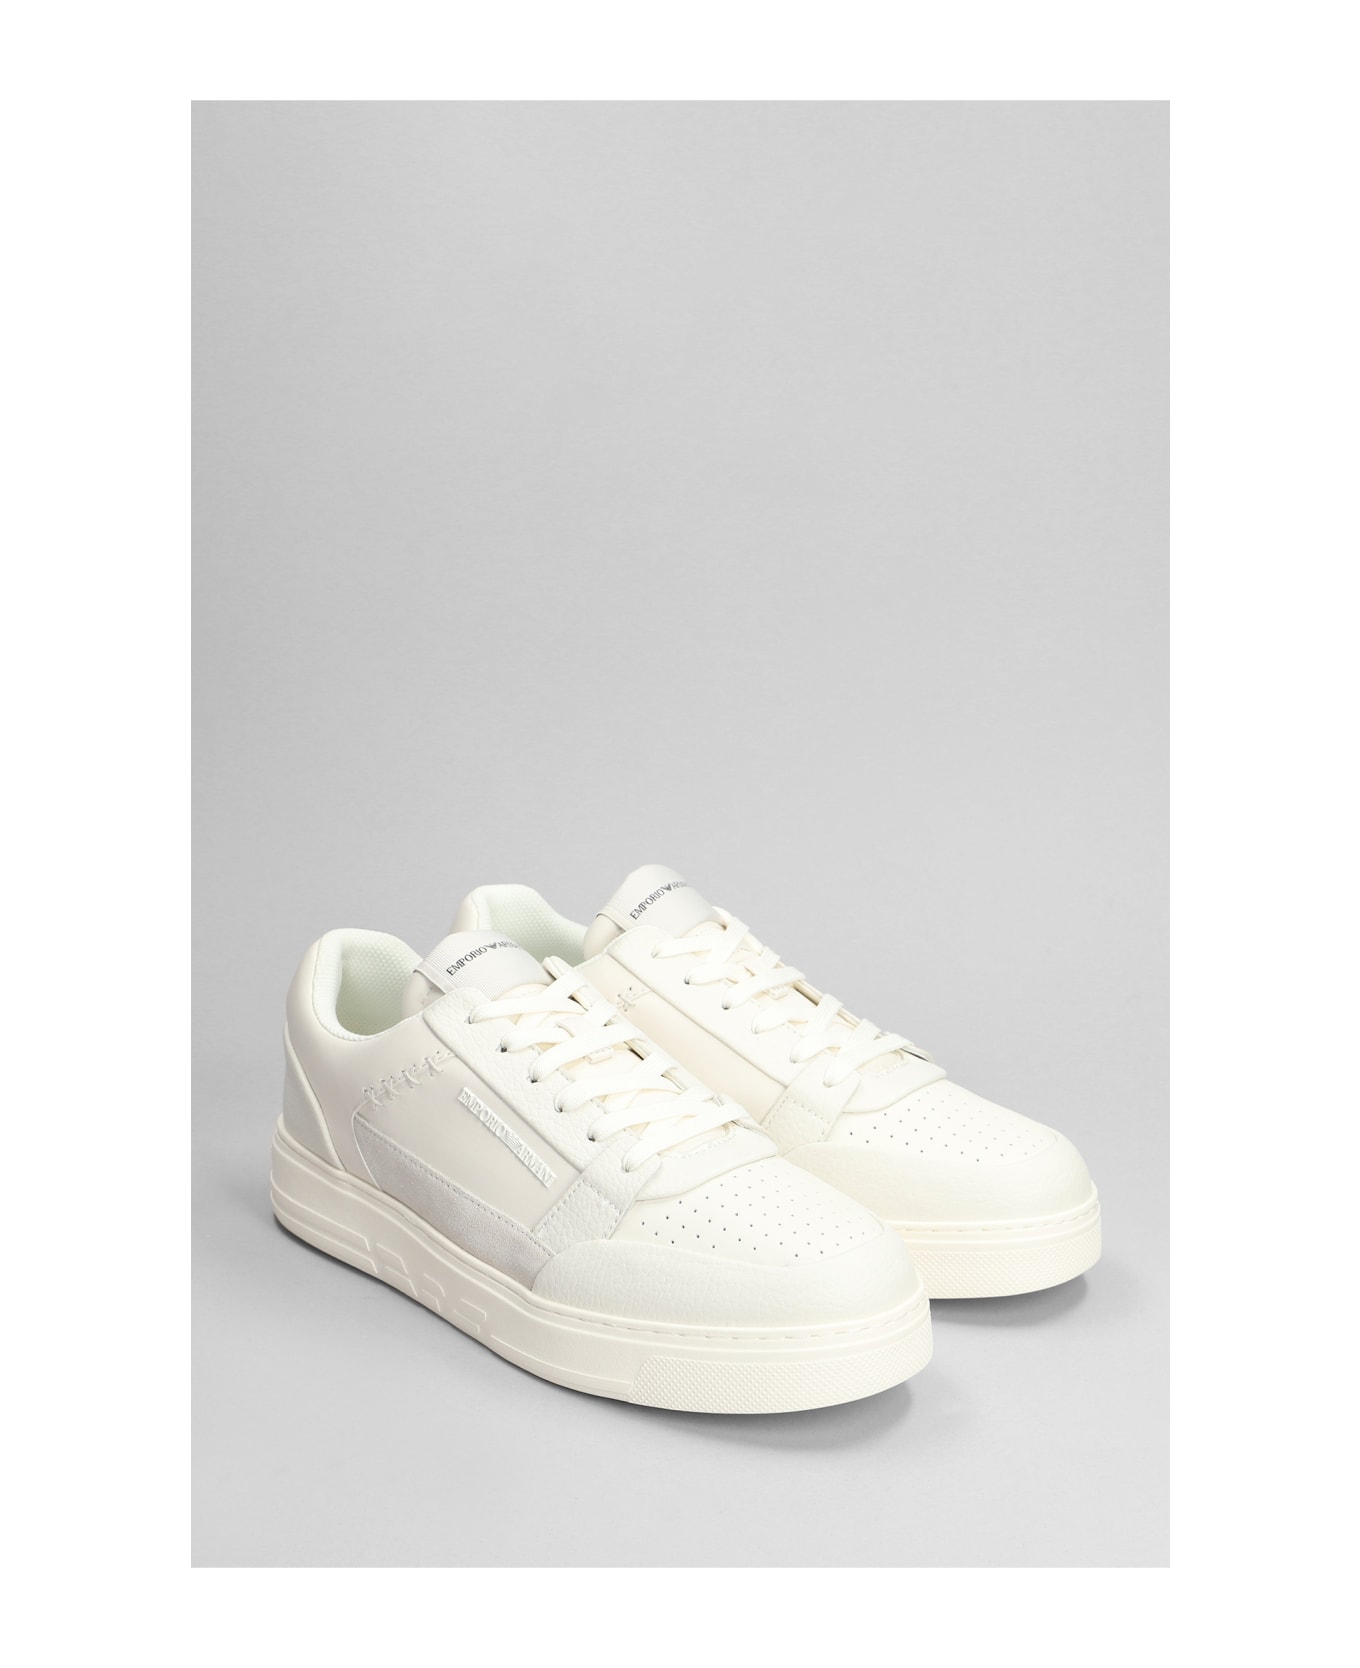 Emporio Armani Sneakers In Beige Suede And Leather - beige